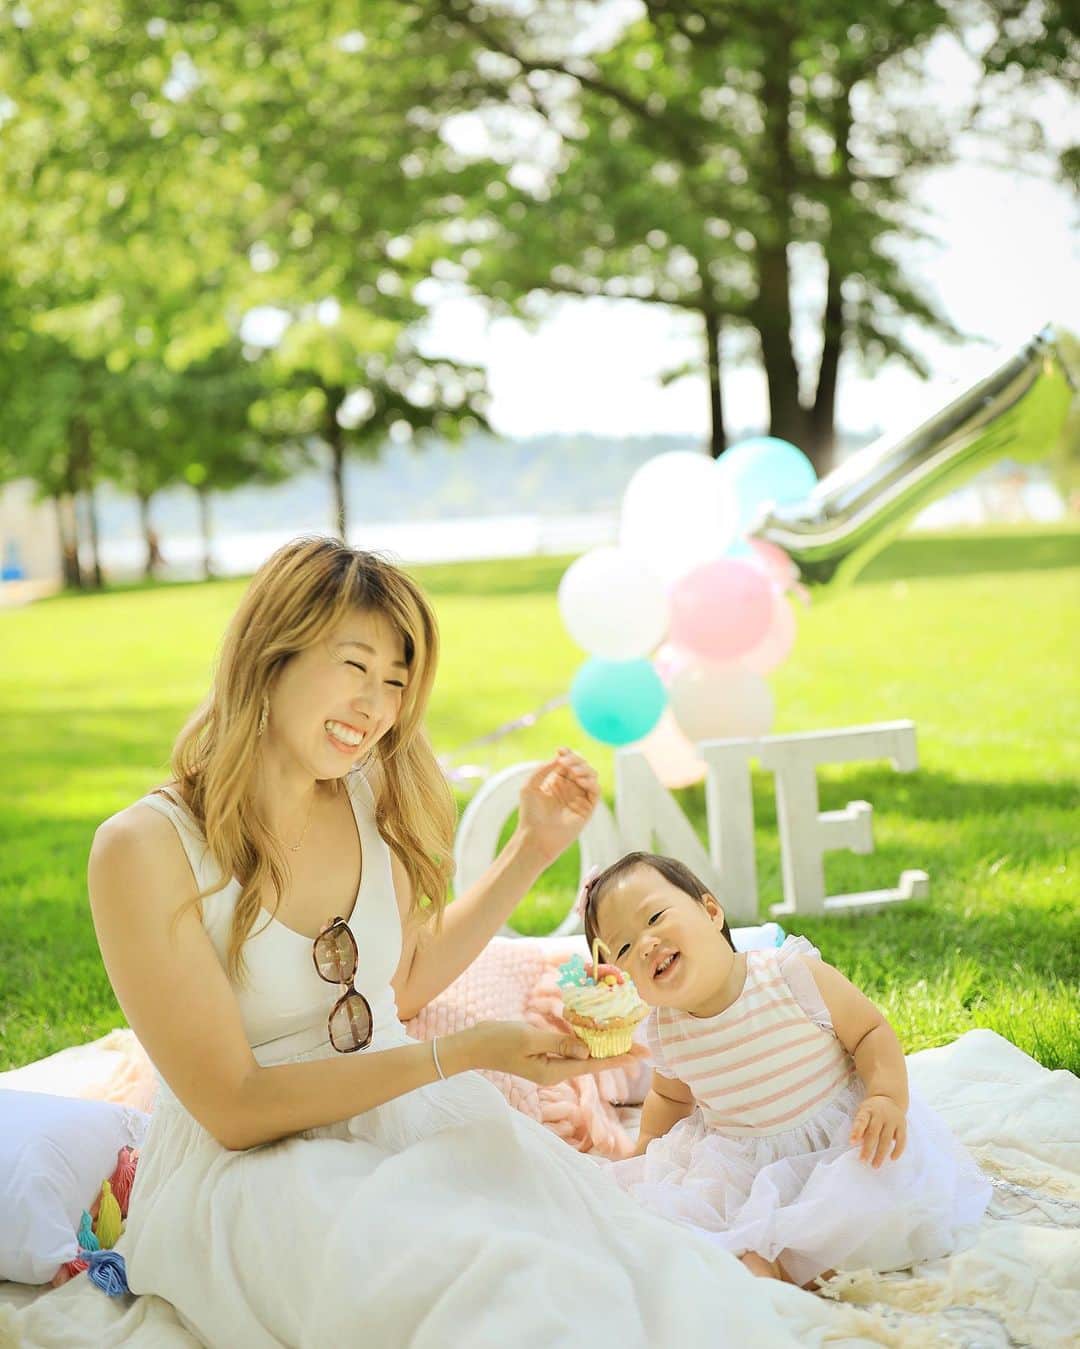 吉田ちかさんのインスタグラム写真 - (吉田ちかInstagram)「Had a family picnic to celebrate Pudding’s first birthday!! I have to say it’s been awhile since my last DIY project so I enjoyed staying up late making all of the decorations! A big thanks to my family for helping make this party possible! Can’t wait to show Pudding all of the pictures and videos from this party someday!﻿ ﻿ A huge thanks to all of you for supporting us in our first year as parents.  Pudding has become such a social, people-person (baby lol) because of all the Chikatomos we run into! Thank you for all the love! ﻿ ﻿ And a big thanks to all of our friends and family for always being there. I still have so much to learn and there are times I feel stressed out and frustrated with myself, but that’s all part of growing up! Because it’s not just Pudding that’s doing the growing! No matter how old you get, there’s always going to be more growing up to be done!﻿ ﻿ To Osaru-san and Pudding, thank you for always letting me be me❤️﻿ ﻿ プリンの1歳の誕生日のお祝いに家族でピクニックをしました！深夜のデコレーション作業、久しぶりのDIYだったので思わず夢中になってしまいました😅 このピクニックを一緒に形にしてくれた家族に感謝！いつかこの日の写真や映像をプリンに見せてあげるのが楽しみ❤️﻿ ﻿ この1年間、「ママとパパ」になった私たちを応援してくれたちか友のみなさん、いつも本当にありがとうございます！色んなところでちか友の方とお会いするのですが、皆さんのお陰でプリンがとっても社交的になりました😊 いつも沢山のラブをありがとうございます！！﻿ ﻿ そして、側で支えてくれた友達や家族にも感謝❤️ まだまだ未熟でストレスを感じることや、自分にイライラすることも沢山あるけど、それが成長ですよね！成長しているのはプリンだけじゃないですからw 人間、何歳になっても成長！﻿ ﻿ おさるさんとプリン、私が常に私らしくいられるのは2人のおかげ。いつもありがとう💕﻿ ﻿ #1歳になってもおさるさんには警戒心w #最後の一枚🤣」6月15日 20時13分 - bilingirl_chika